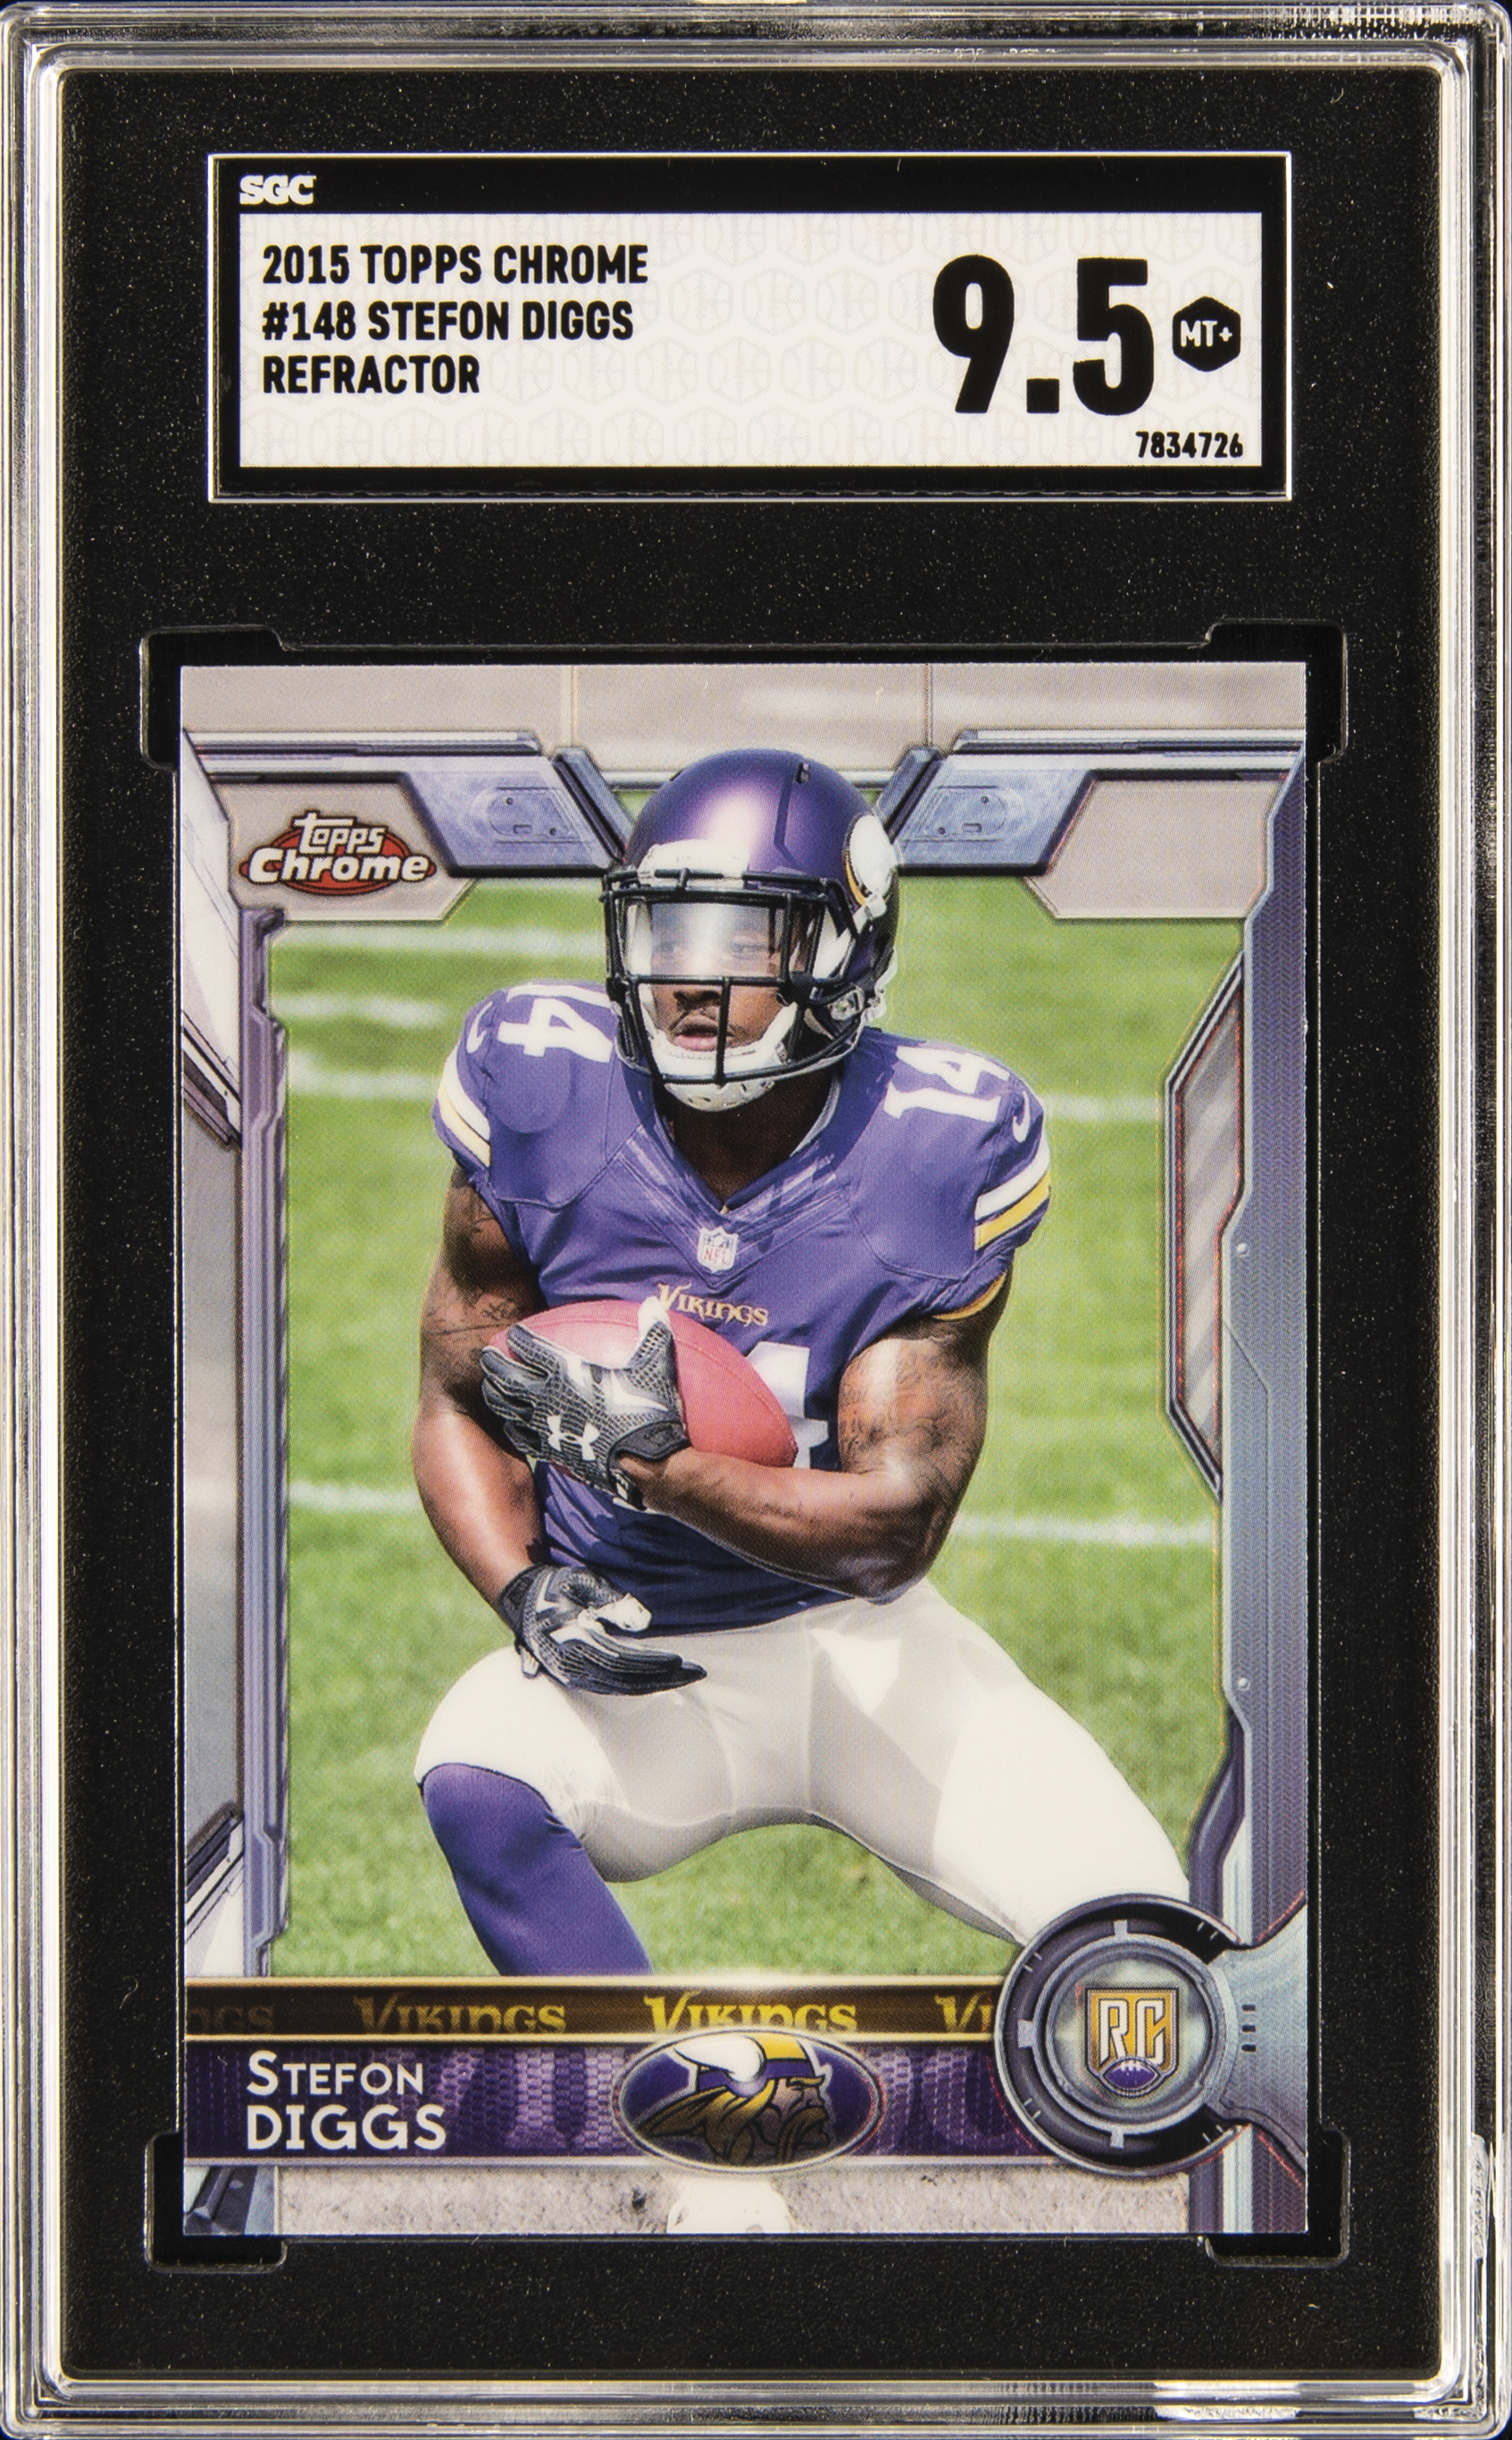 2015 Topps Chrome Refractor 148 Stefon Diggs – SGC MT 9.5